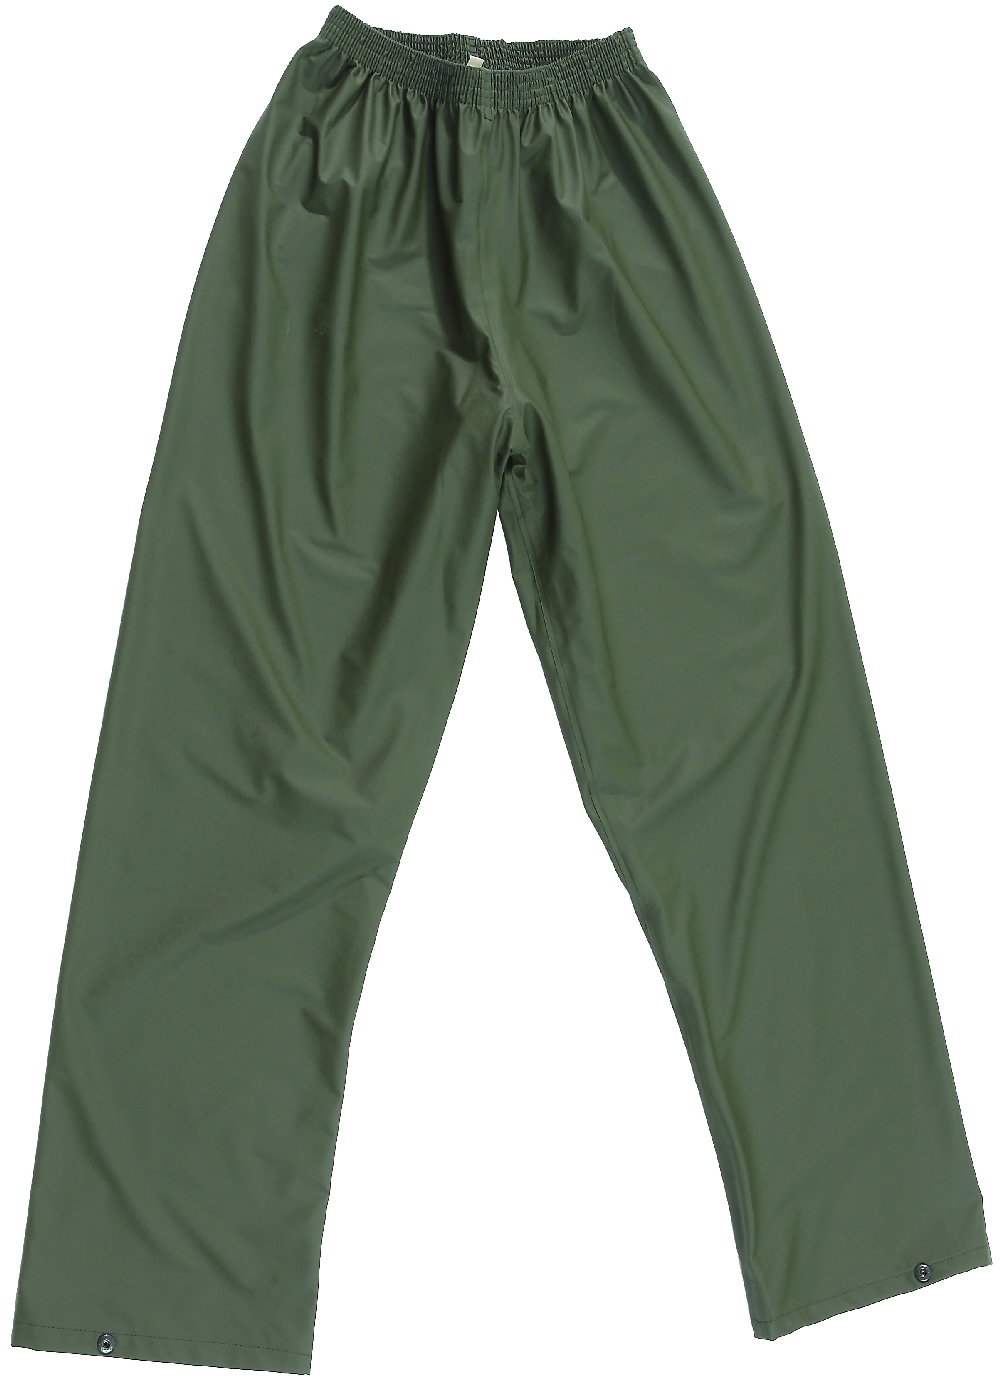 S-XXL FORT FORTEX FLEX Waterproof Windproof STRETCHABLE Over TROUSERS 